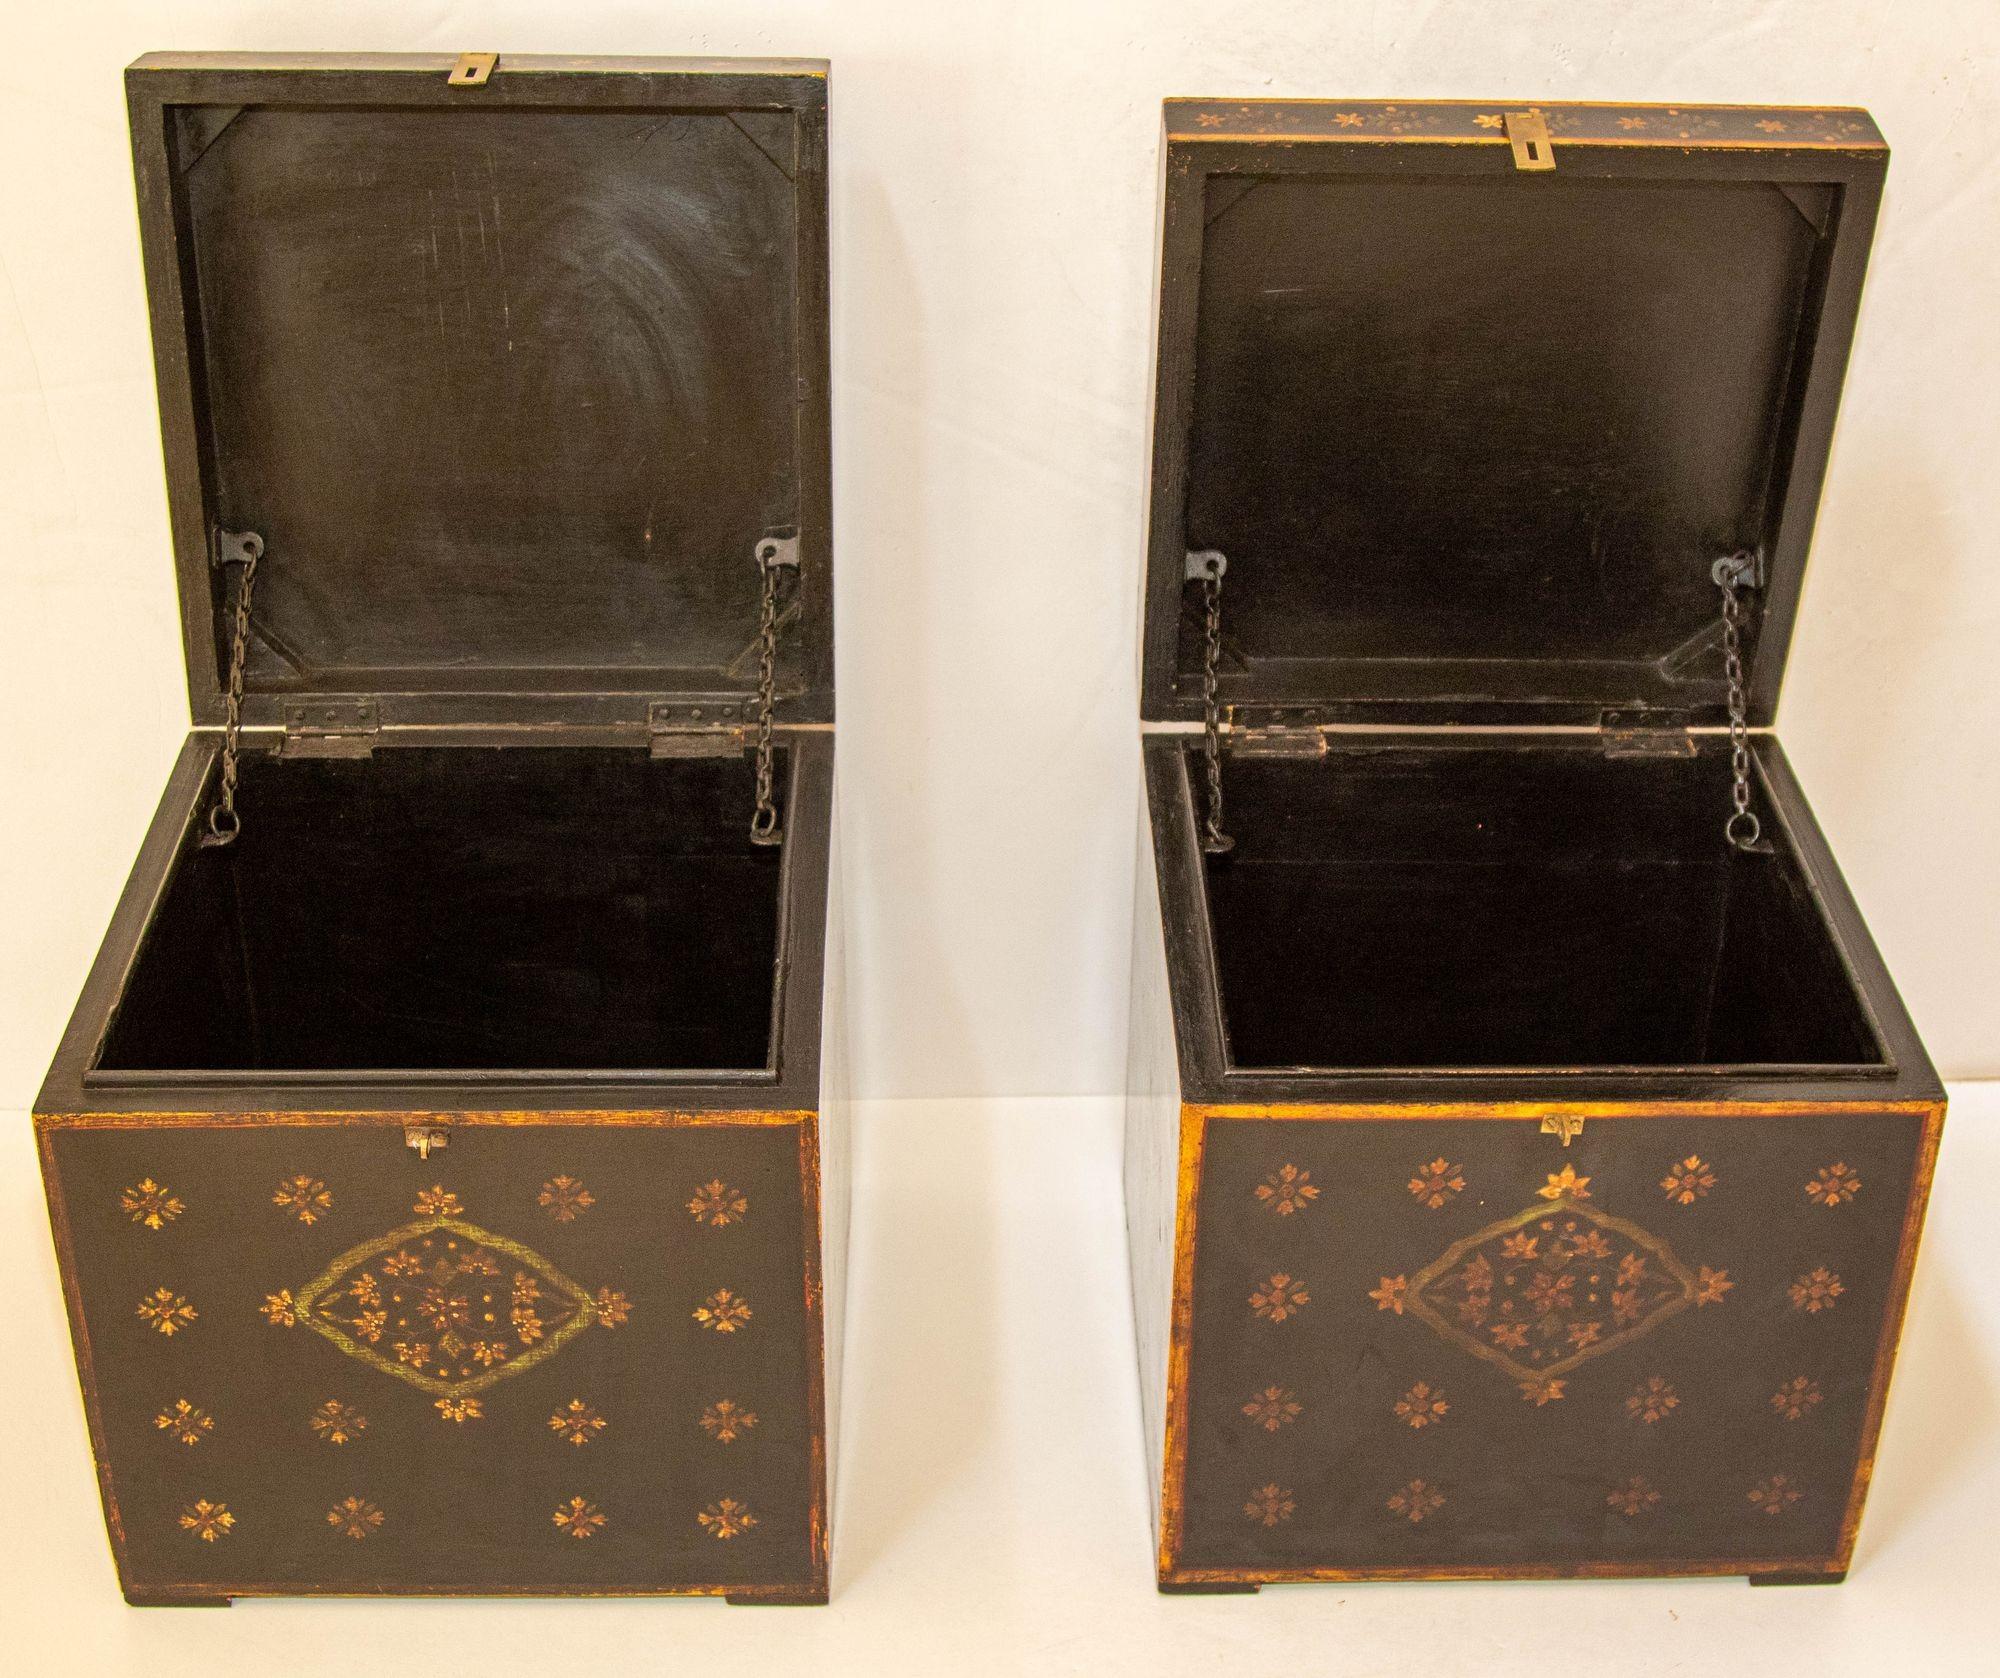 Hand-Crafted 1950s Mughal Style Folk Art Lacquer Hand Painted Decorative Storage Trunks